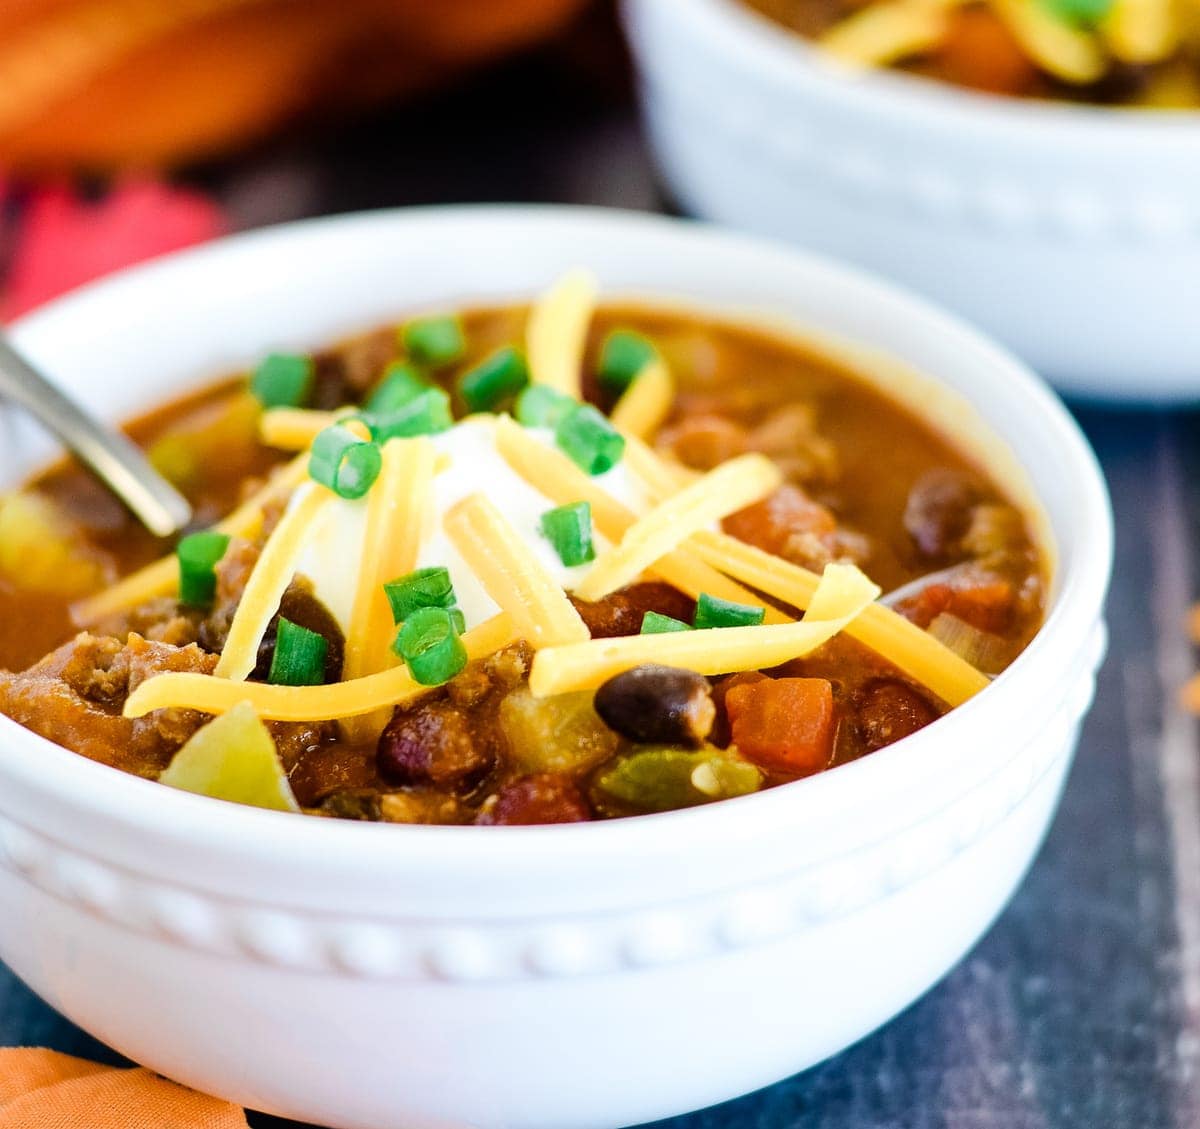 Halloween dinner ideas - pumpkin chili topped with sour cream and shredded cheese.